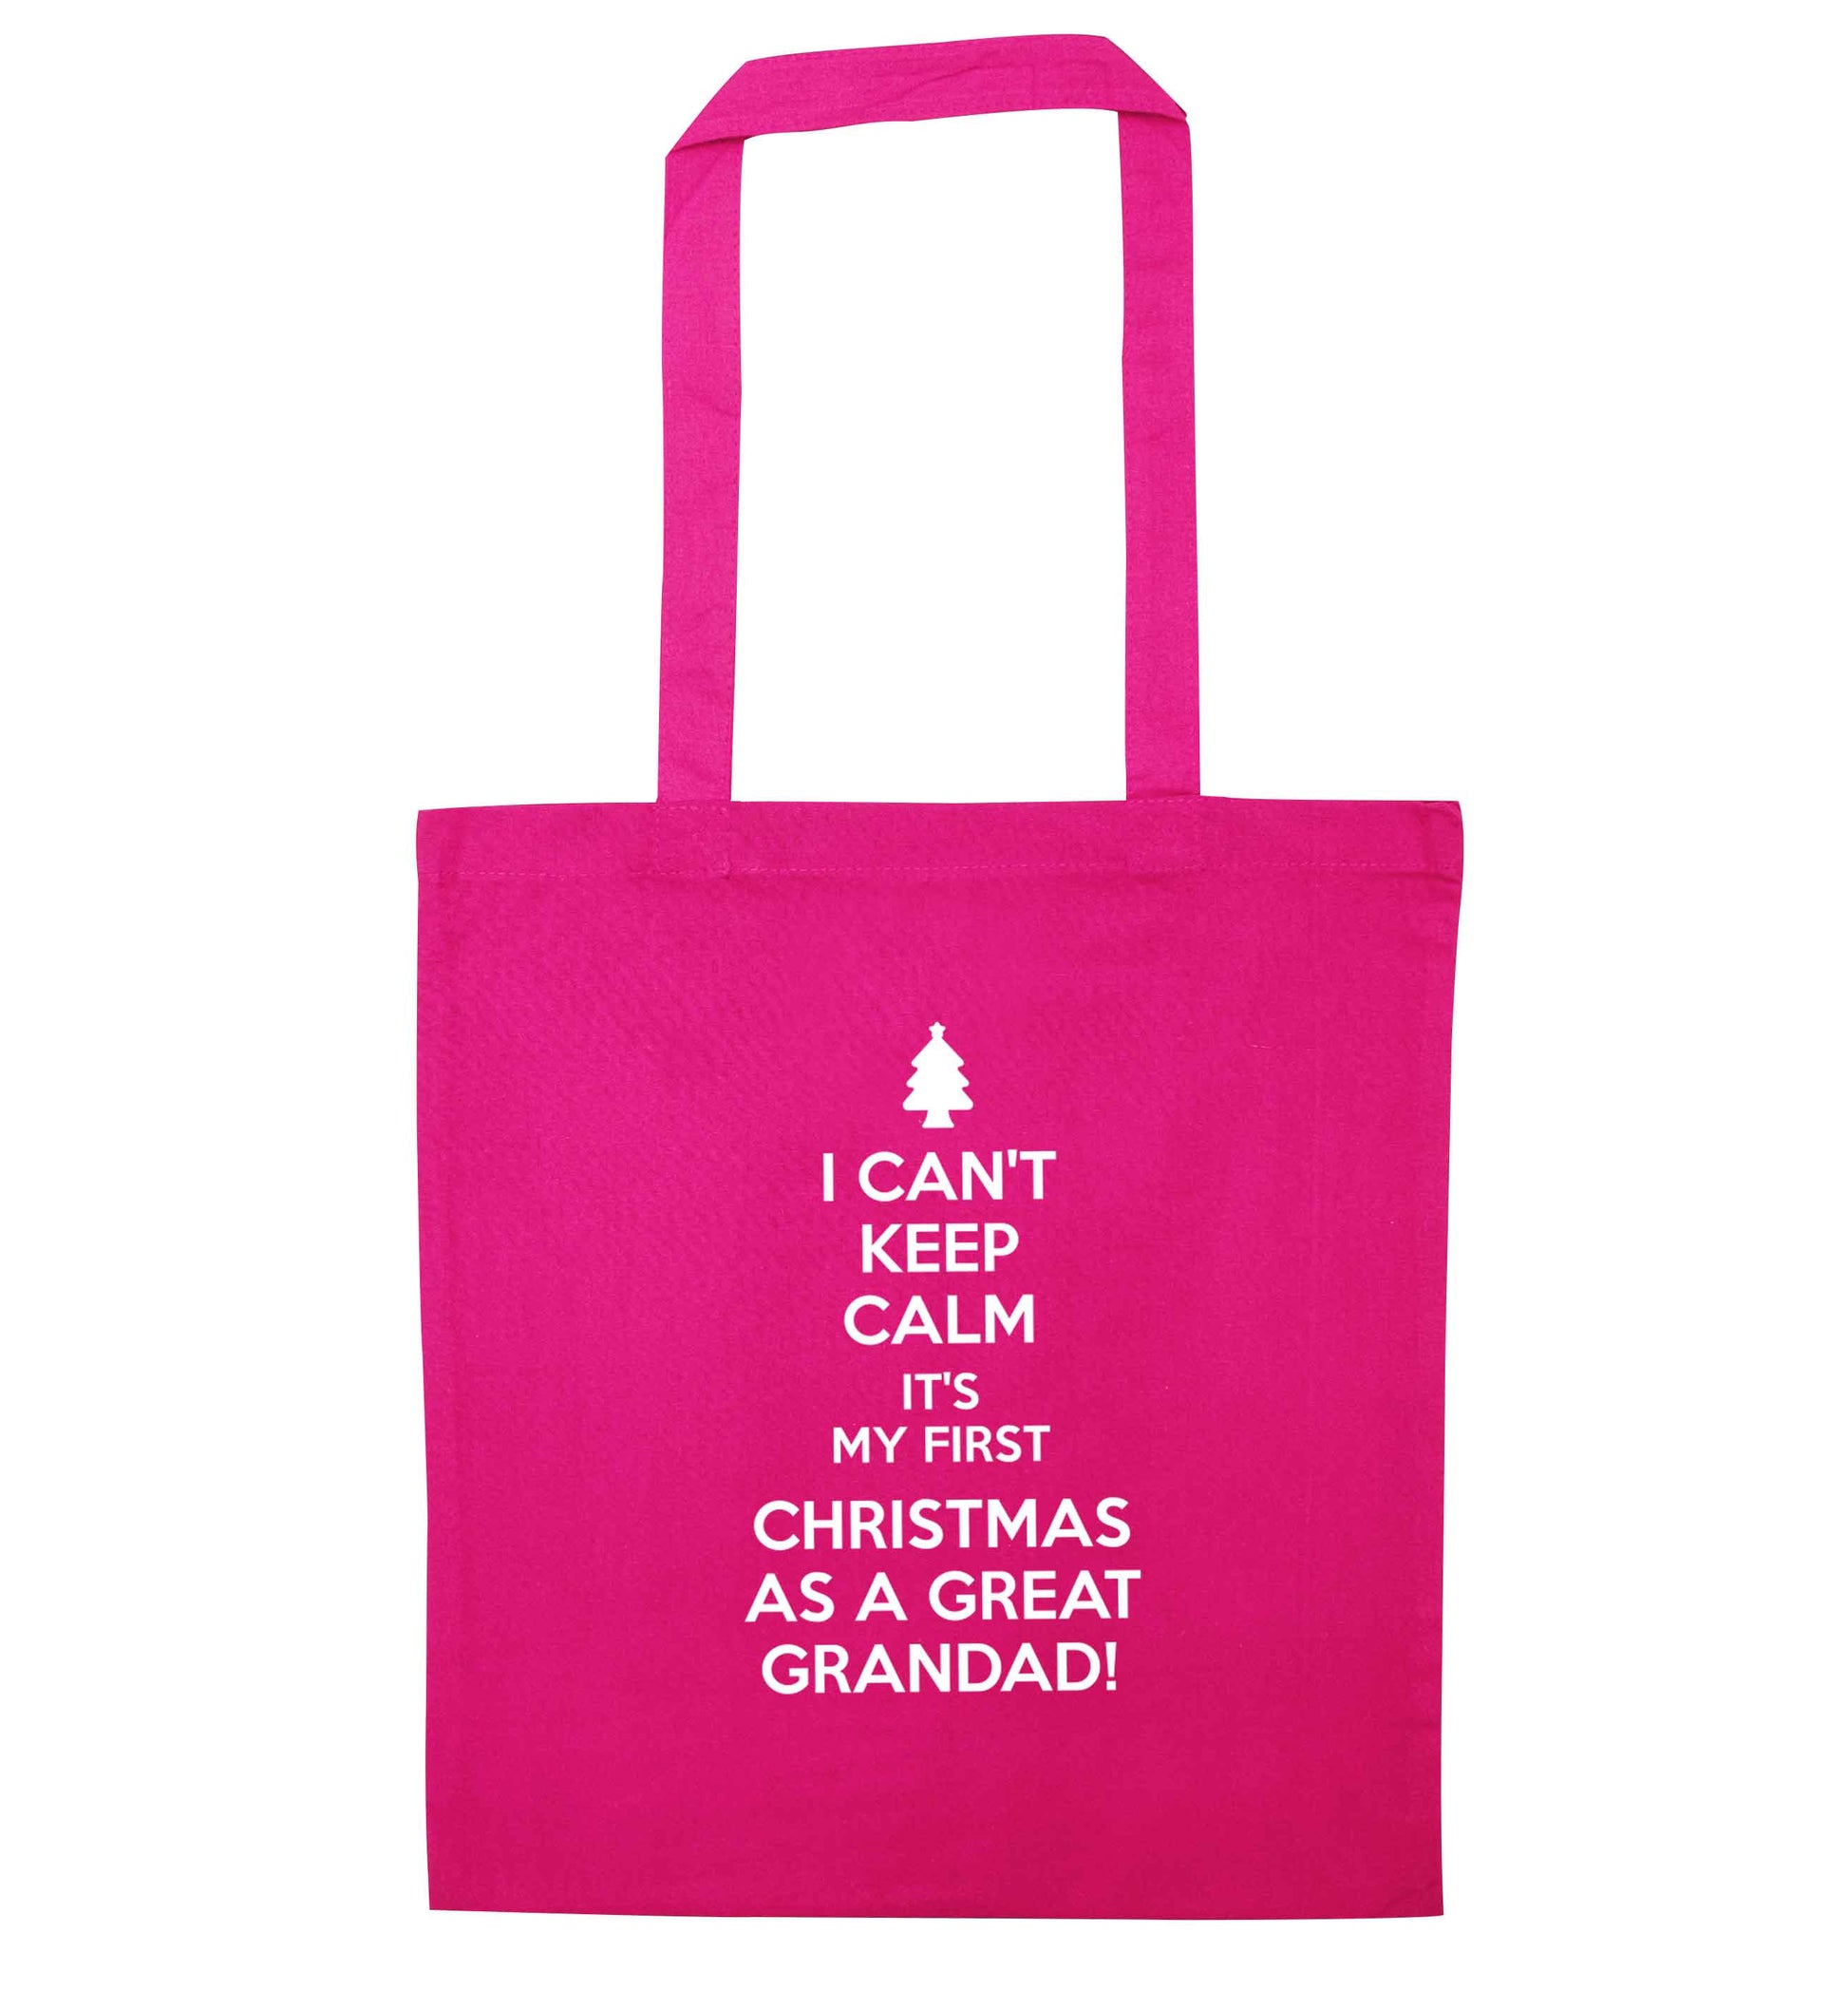 I can't keep calm it's my first Christmas as a great grandad! pink tote bag